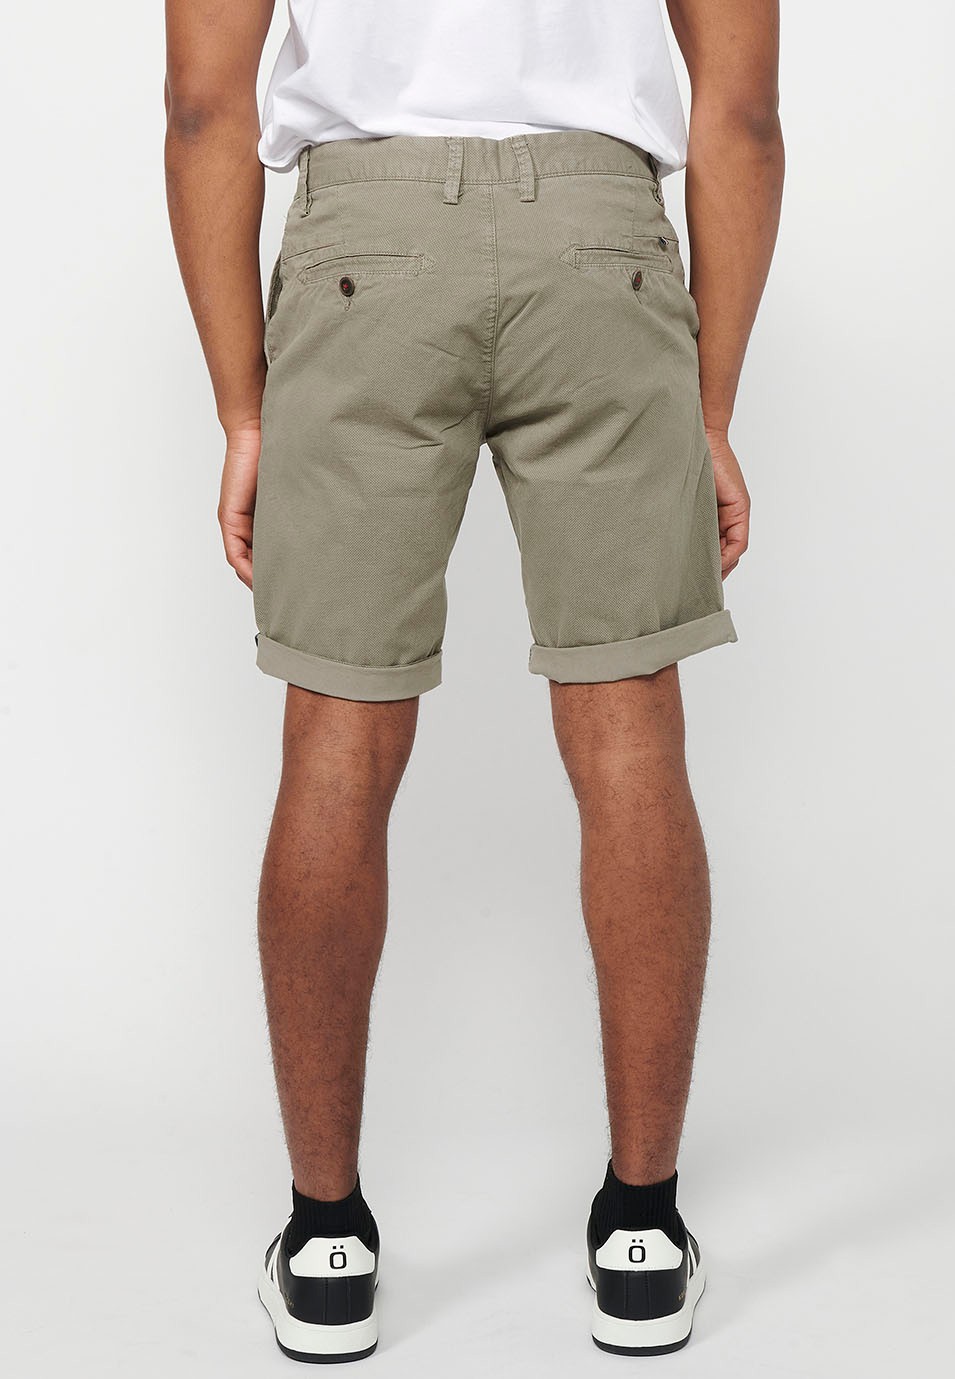 Men's Bermuda Chino Shorts with Turn-Up Finish with Front Zipper and Button Closure with Four Pockets in Mink Color 1